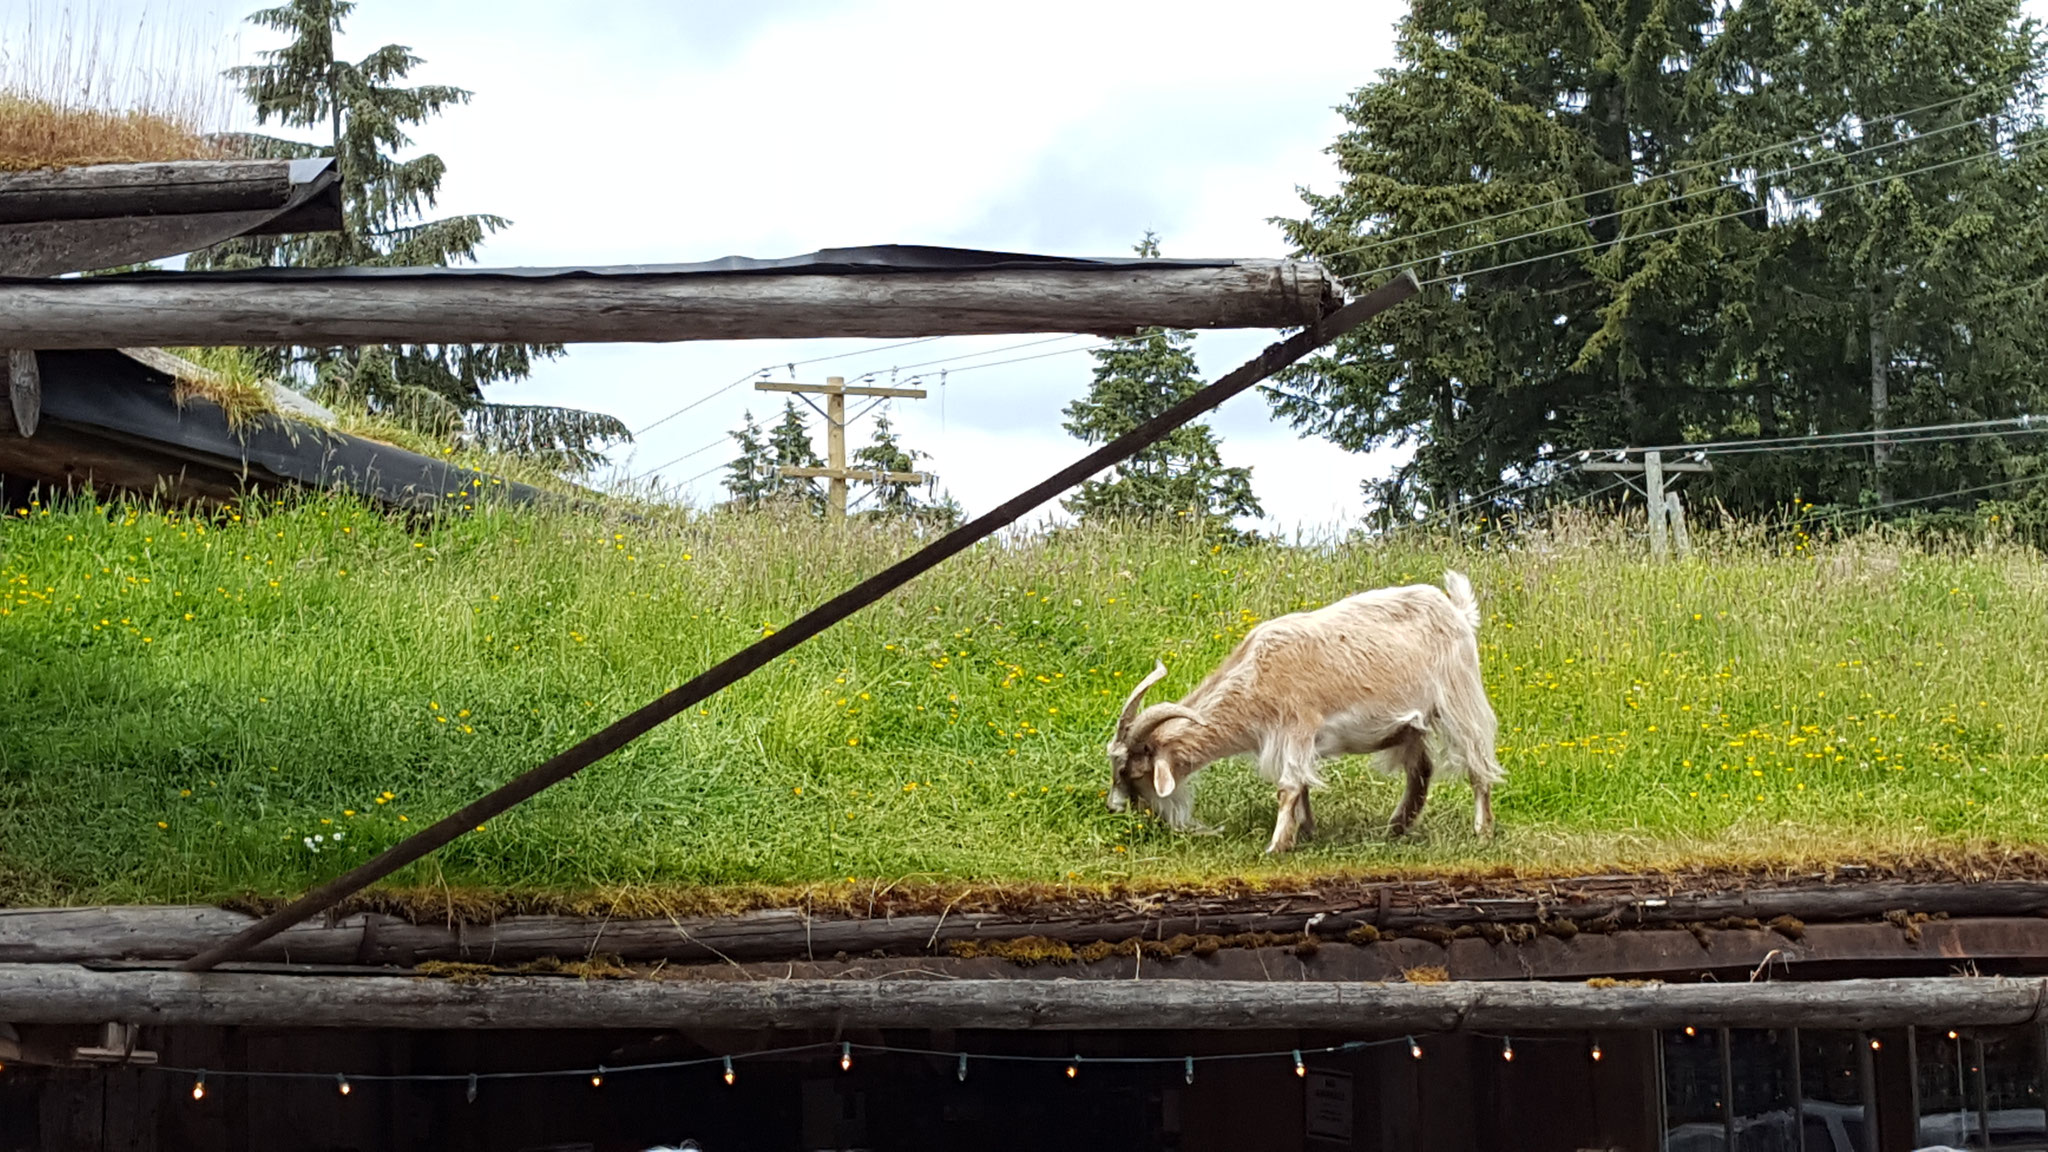 "Goats on the roof" in Coombs